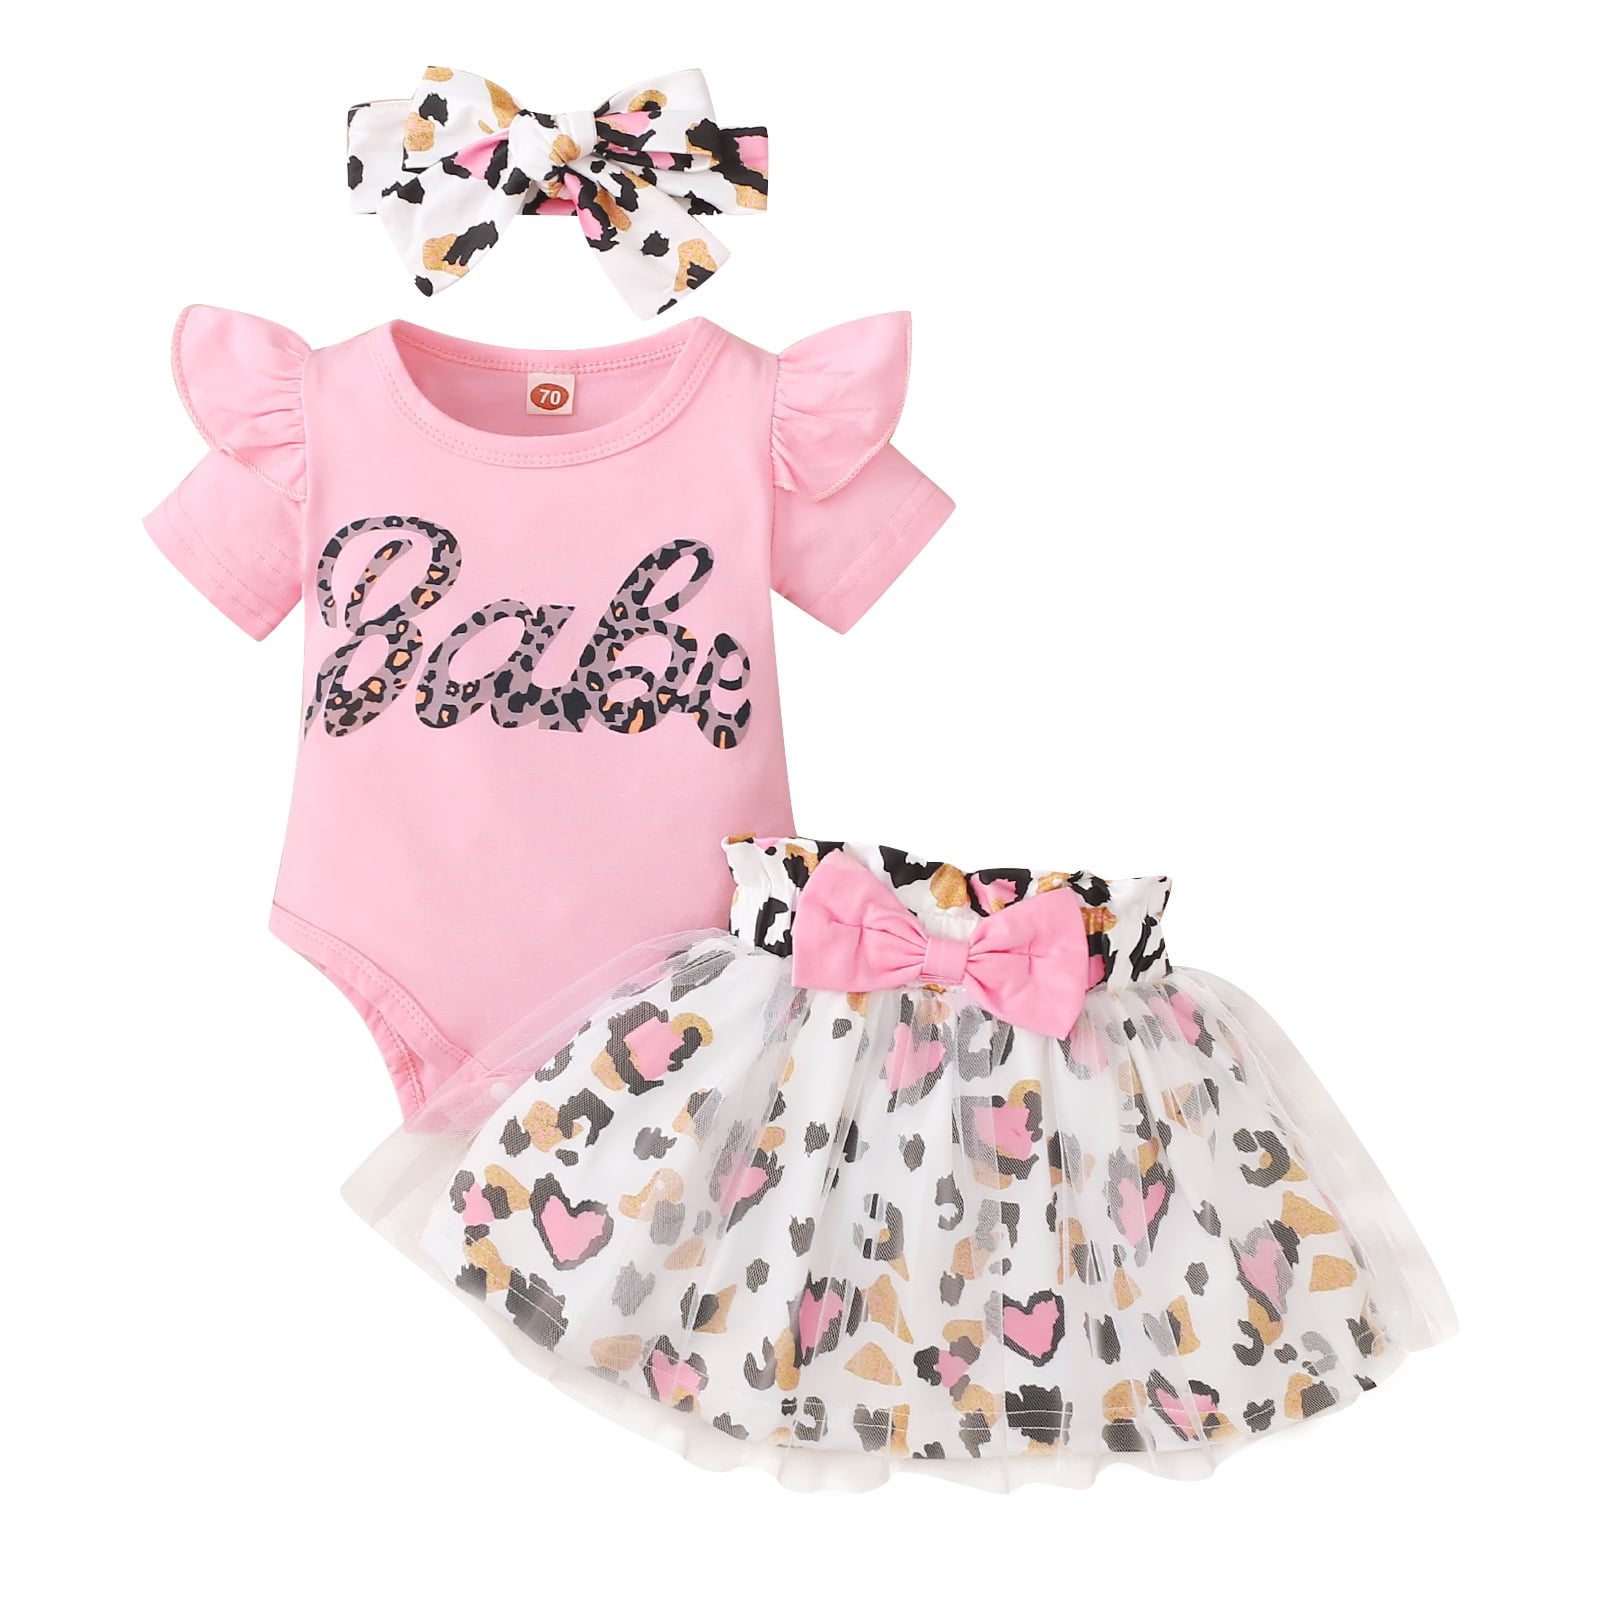 MINKIDFASHION Baby Girls Romper Dress Sets Clothes Female Pink 6-12 ...